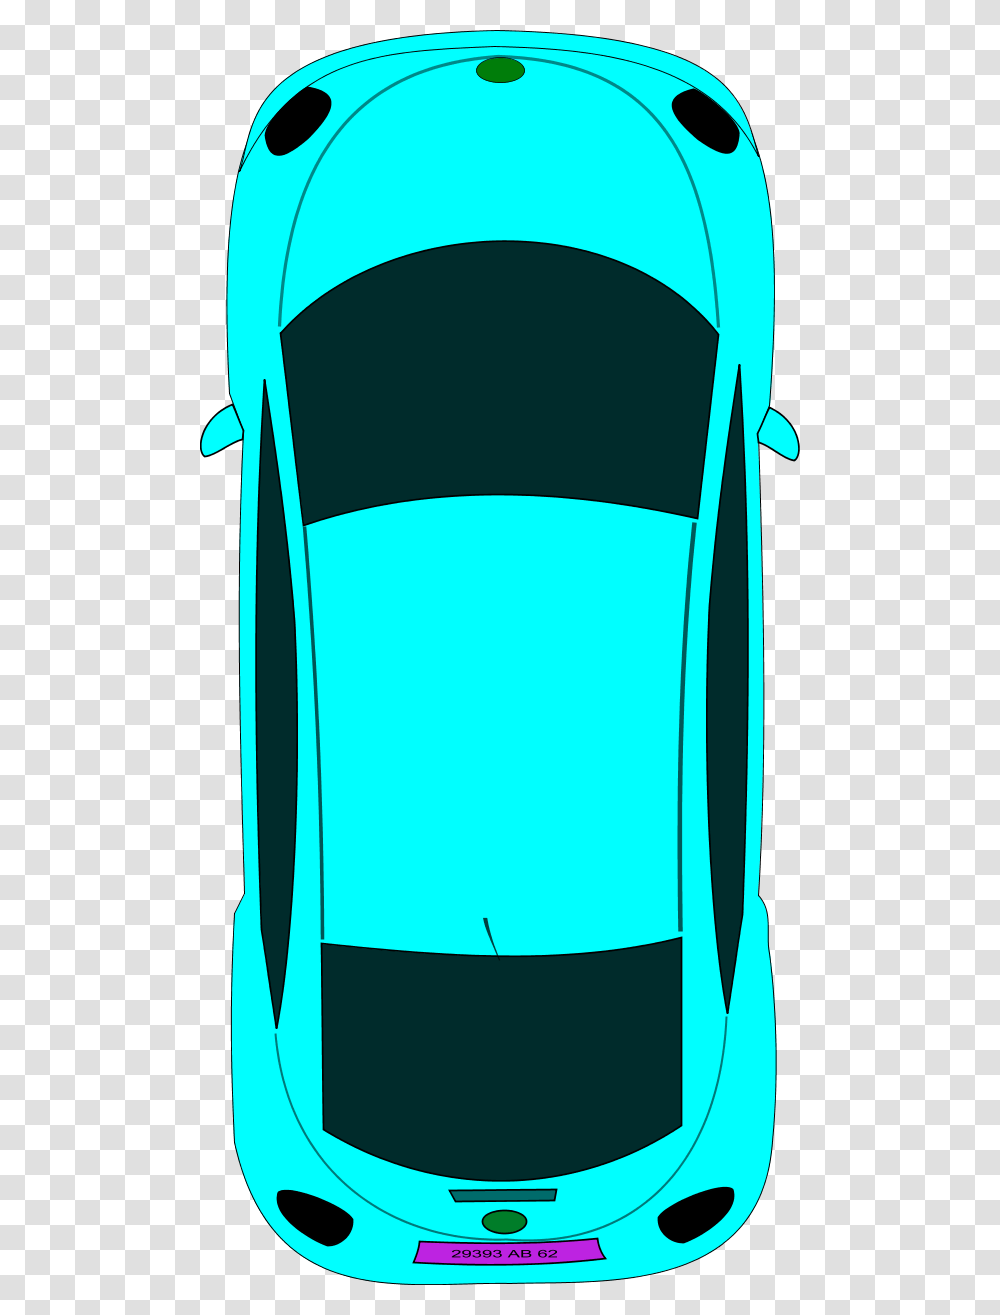 Car Clipart Top View Picture Royalty Free Car Taxi Bird Eye View Cars, Bottle, Spire, Drawing Transparent Png